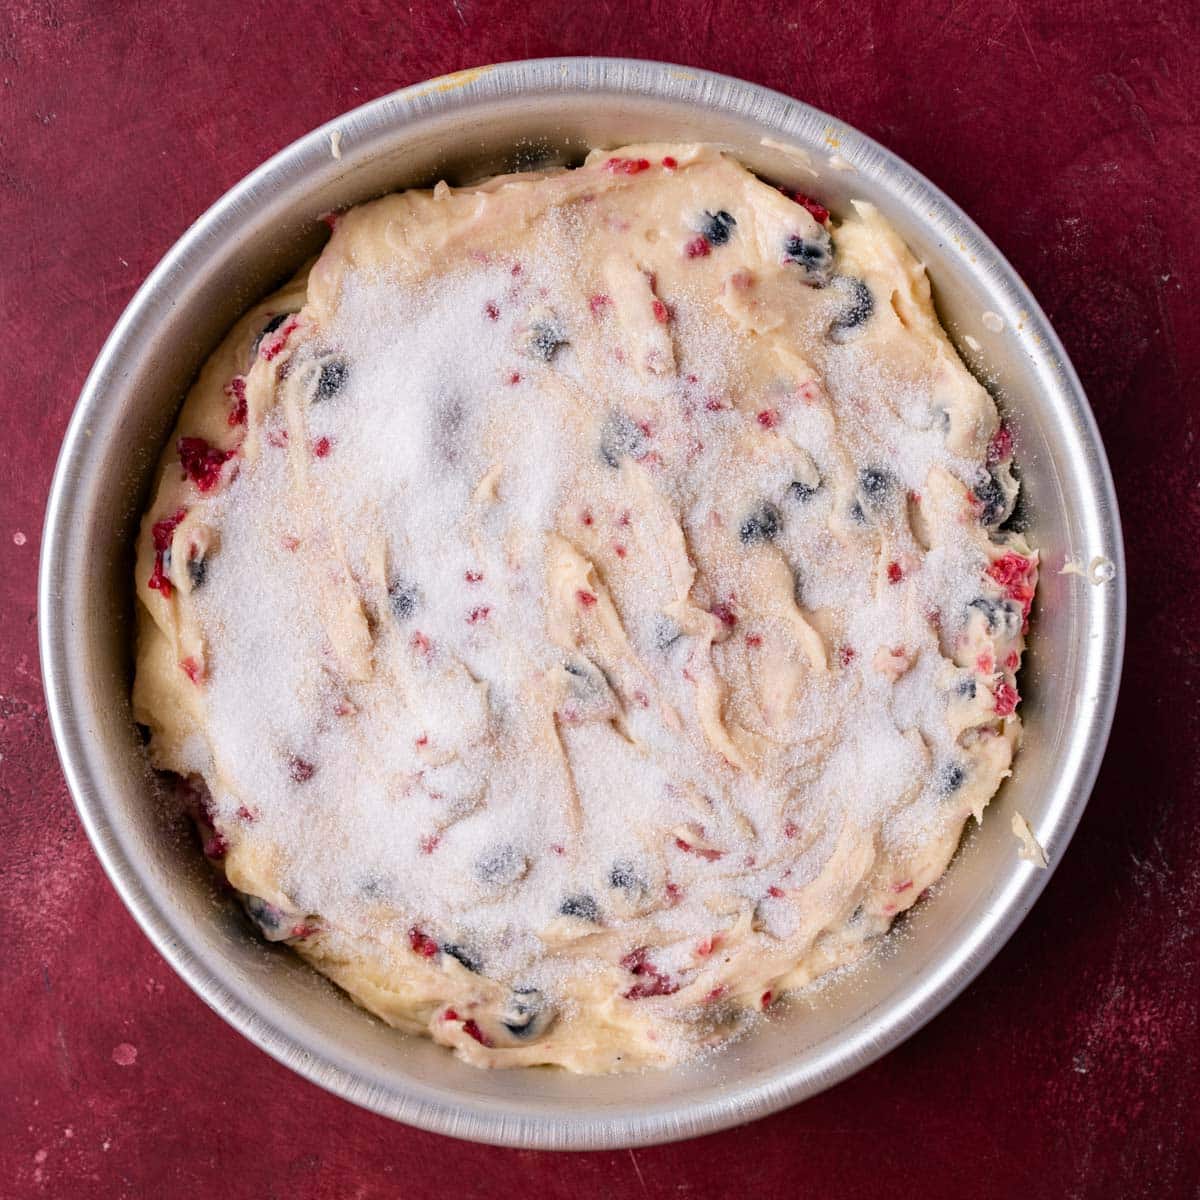 unbaked red white and blueberry cake